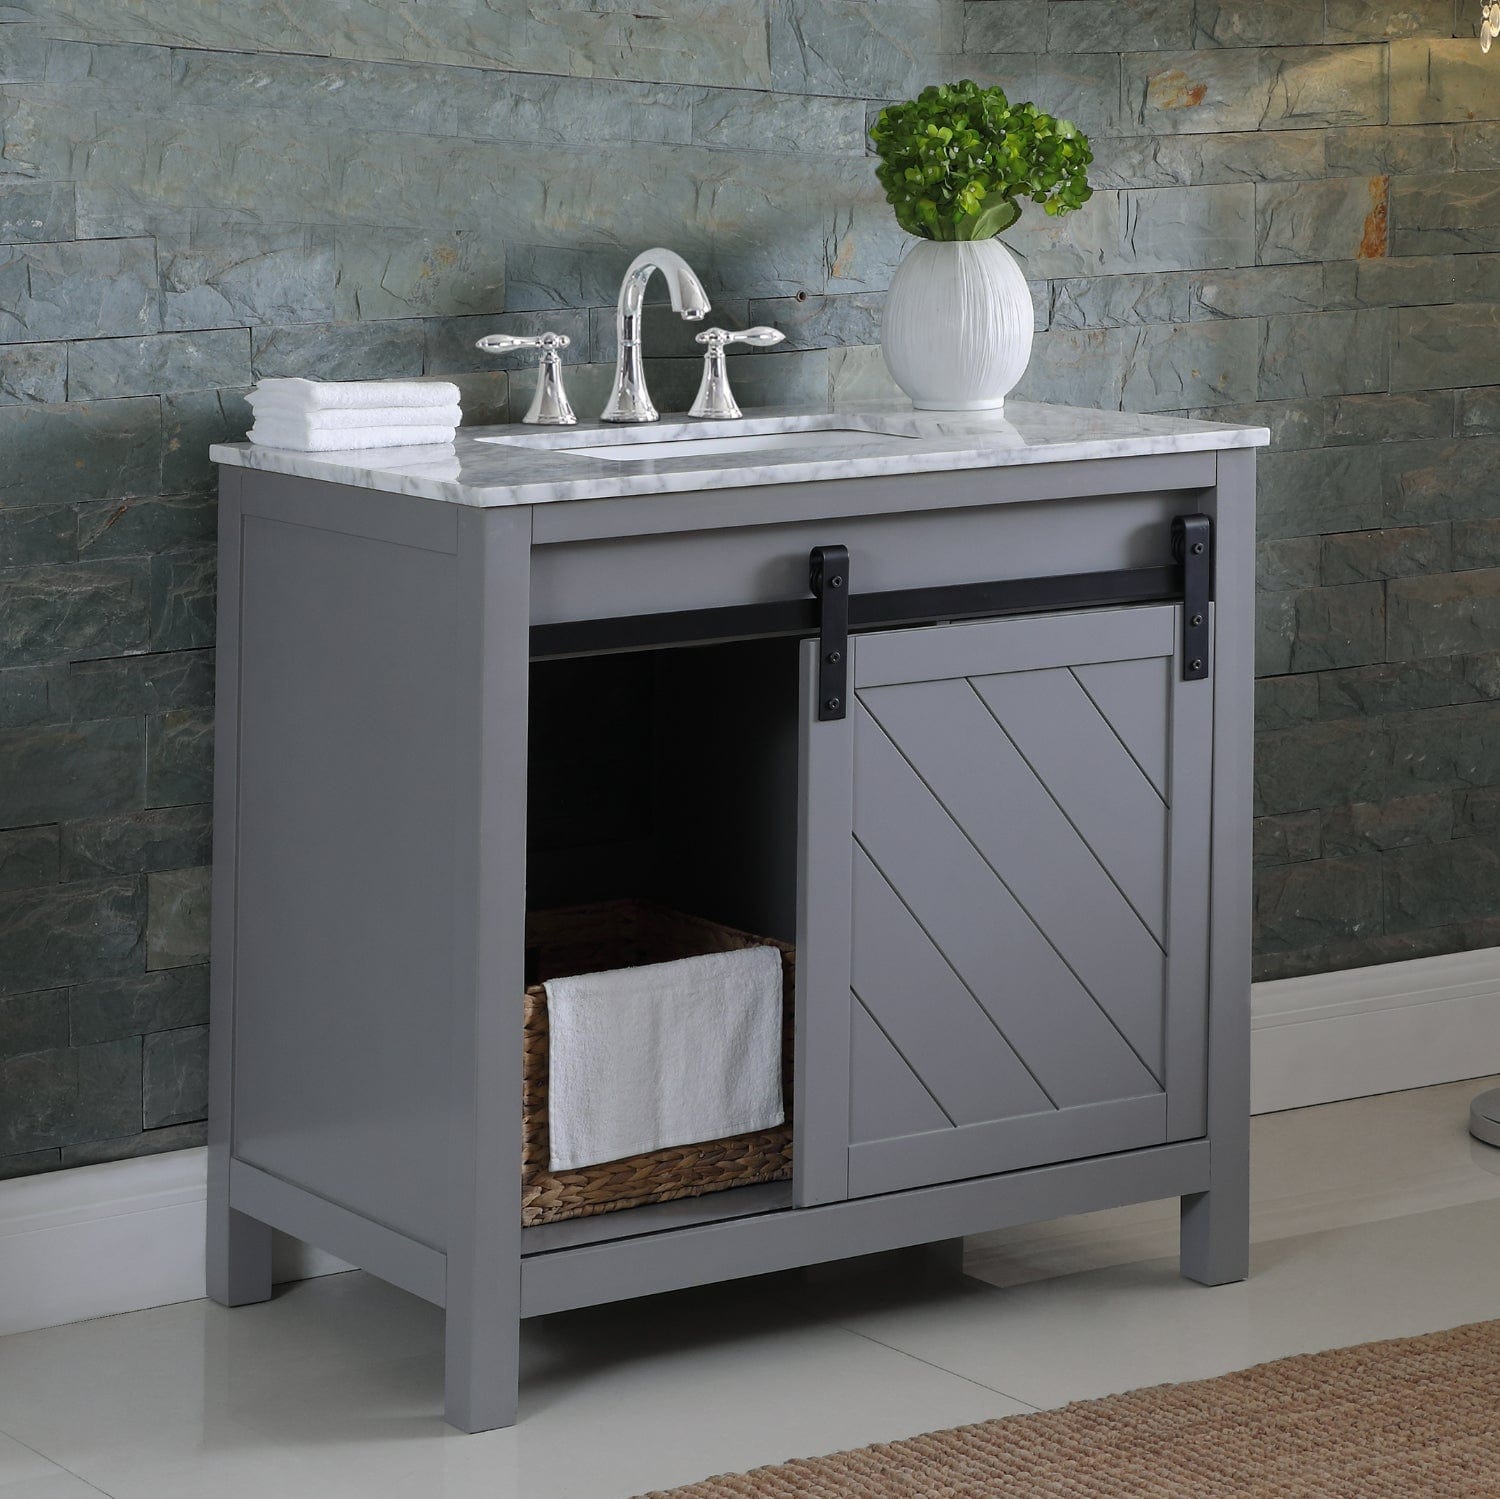 Altair Kinsley 36" Single Bathroom Vanity Set in Gray and Carrara White Marble Countertop without Mirror 536036-GR-CA-NM - Molaix631112970440Vanity536036-GR-CA-NM